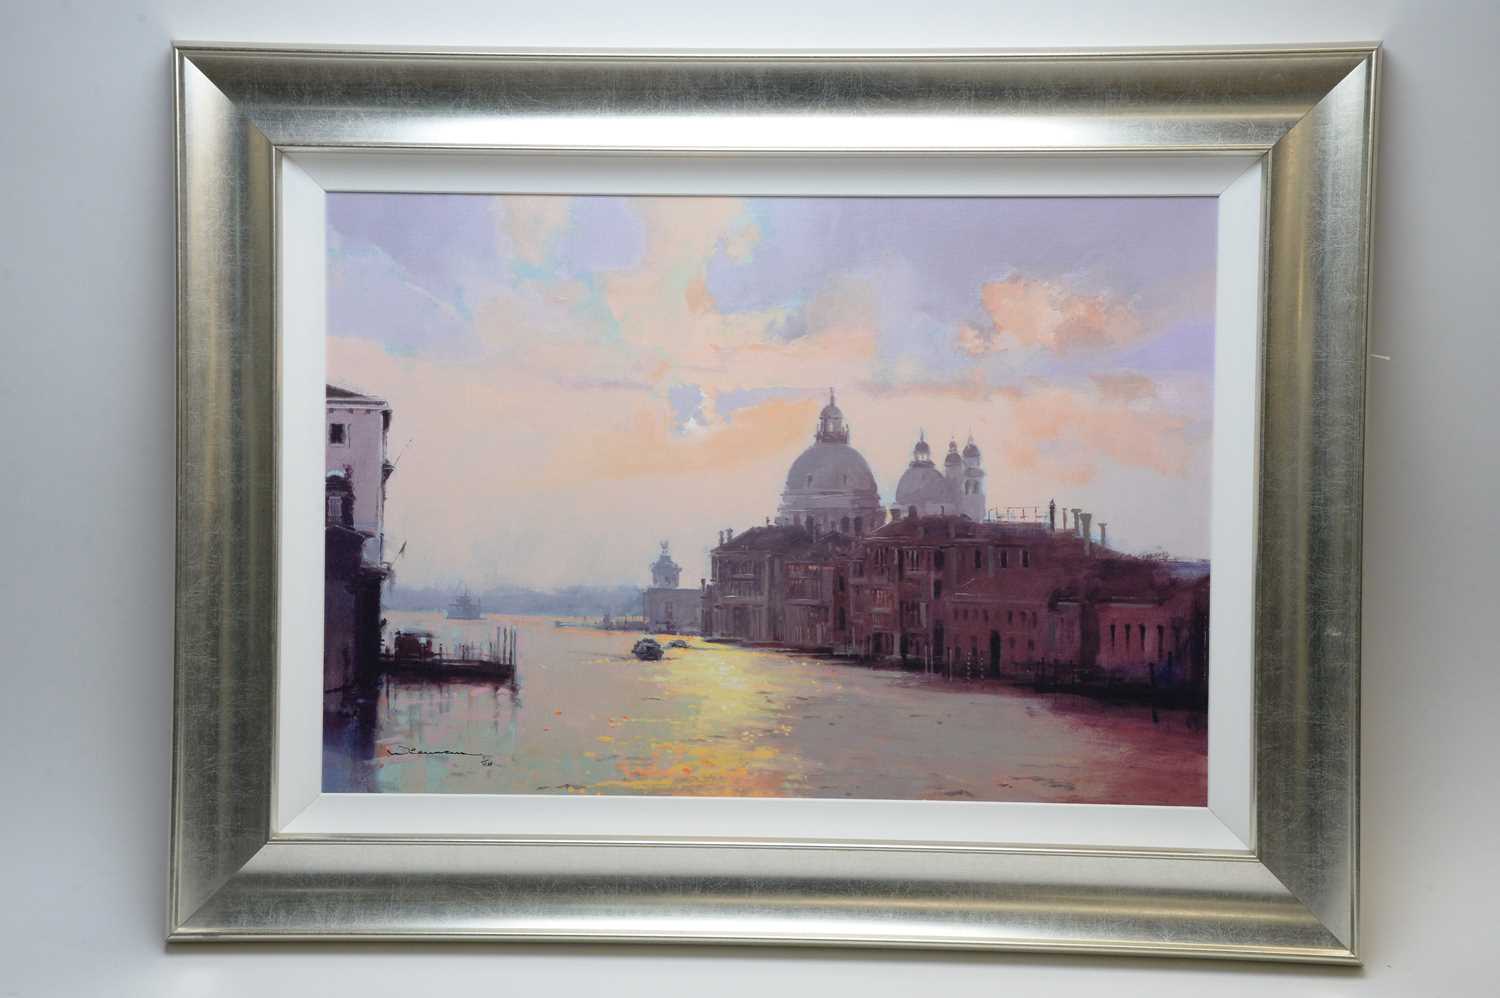 Lot 332 - Peter Wileman - limited edition print.